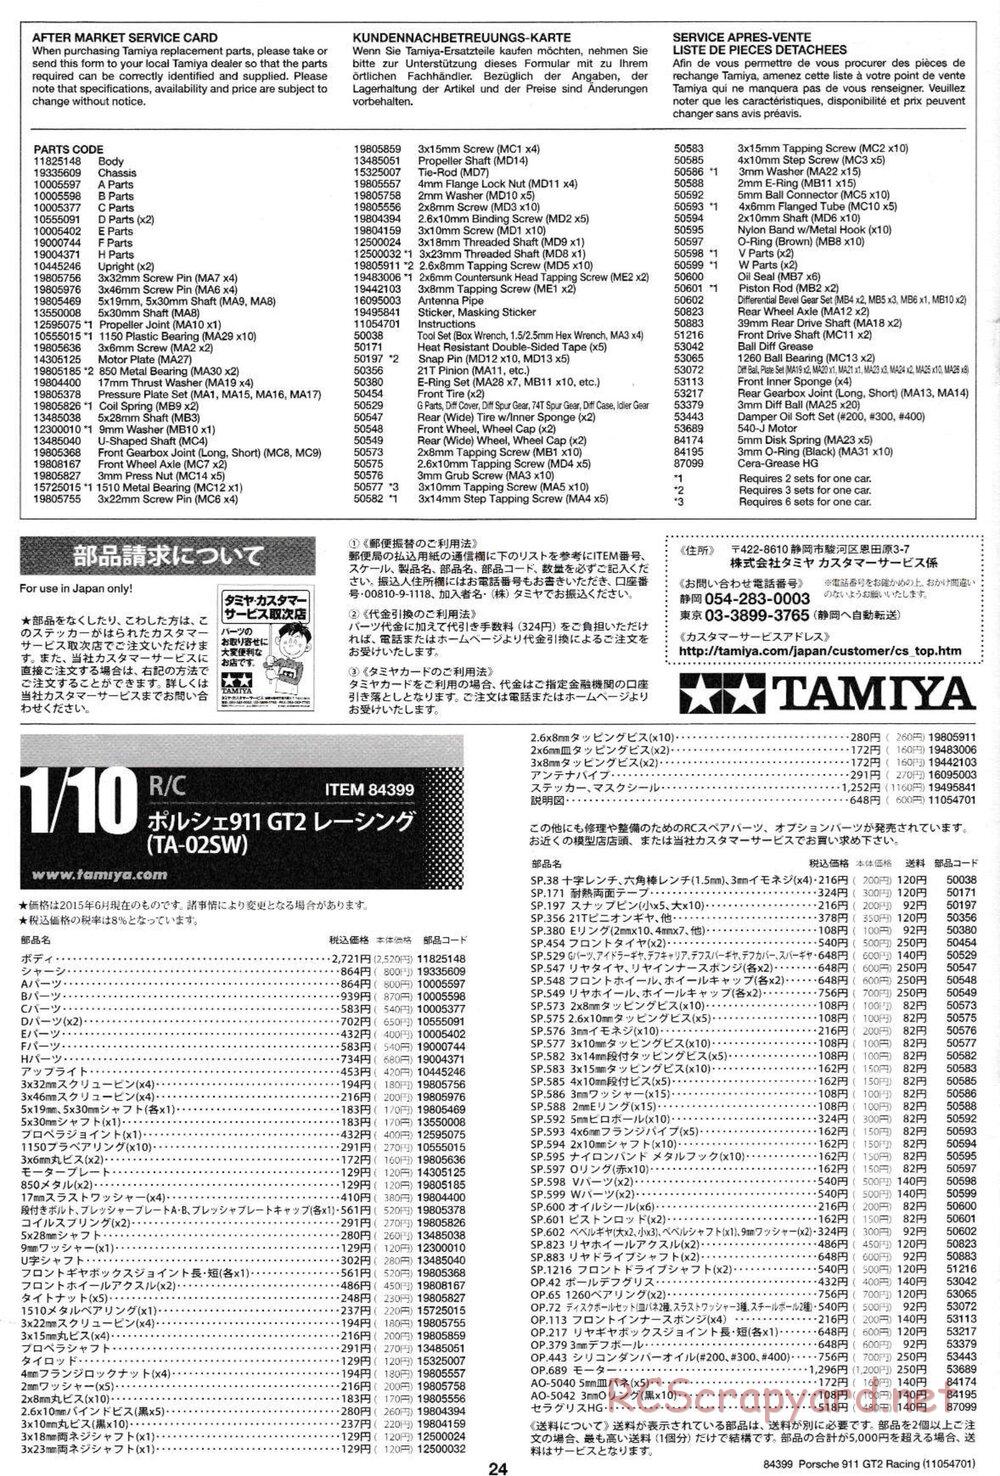 Tamiya - Porsche 911 GT2 Racing - TA-02SW Chassis - Manual - Page 24